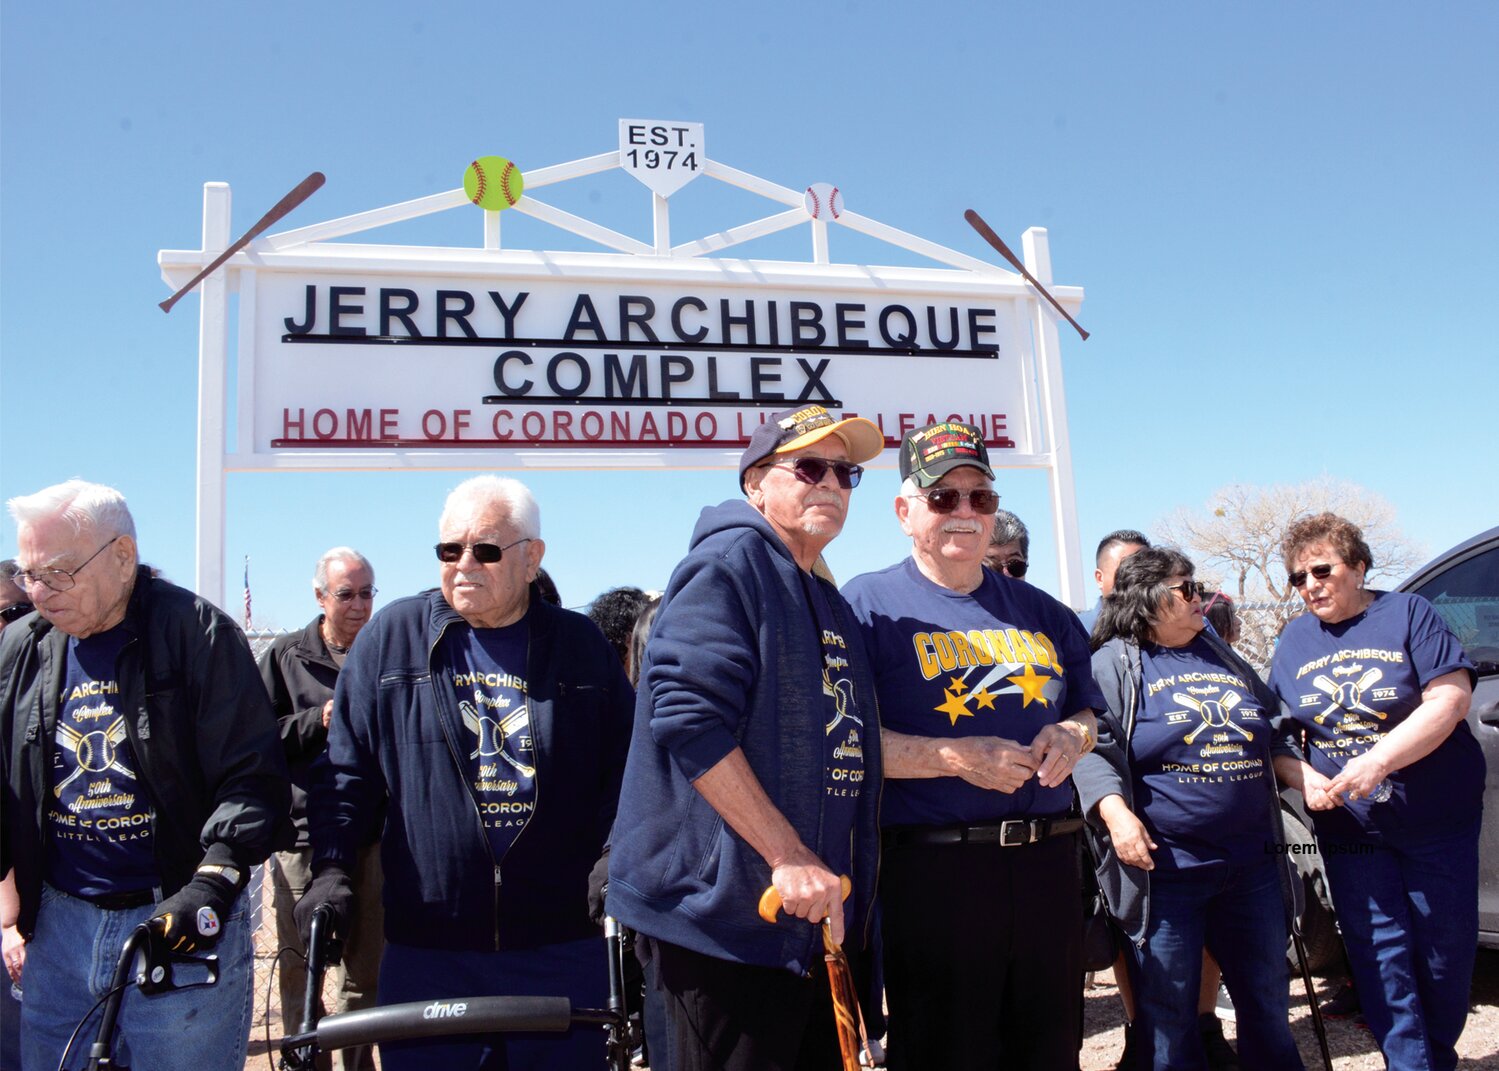 Family, friends and fans of Jerry Archibeque gather outside the new entrance sign to the town of Bernalillo baseball fields, home to the Little League program he founded 50 years ago. From left are his brothers Jake and Clemente Archibeque, Jose B. Trujillo, who helped build the first field, Jerry Archibeque, sister Gloria Archibeque-Lovato, and Lena Archibeque, Jerry's wife. (Bill Diven/Sandoval Signpost)